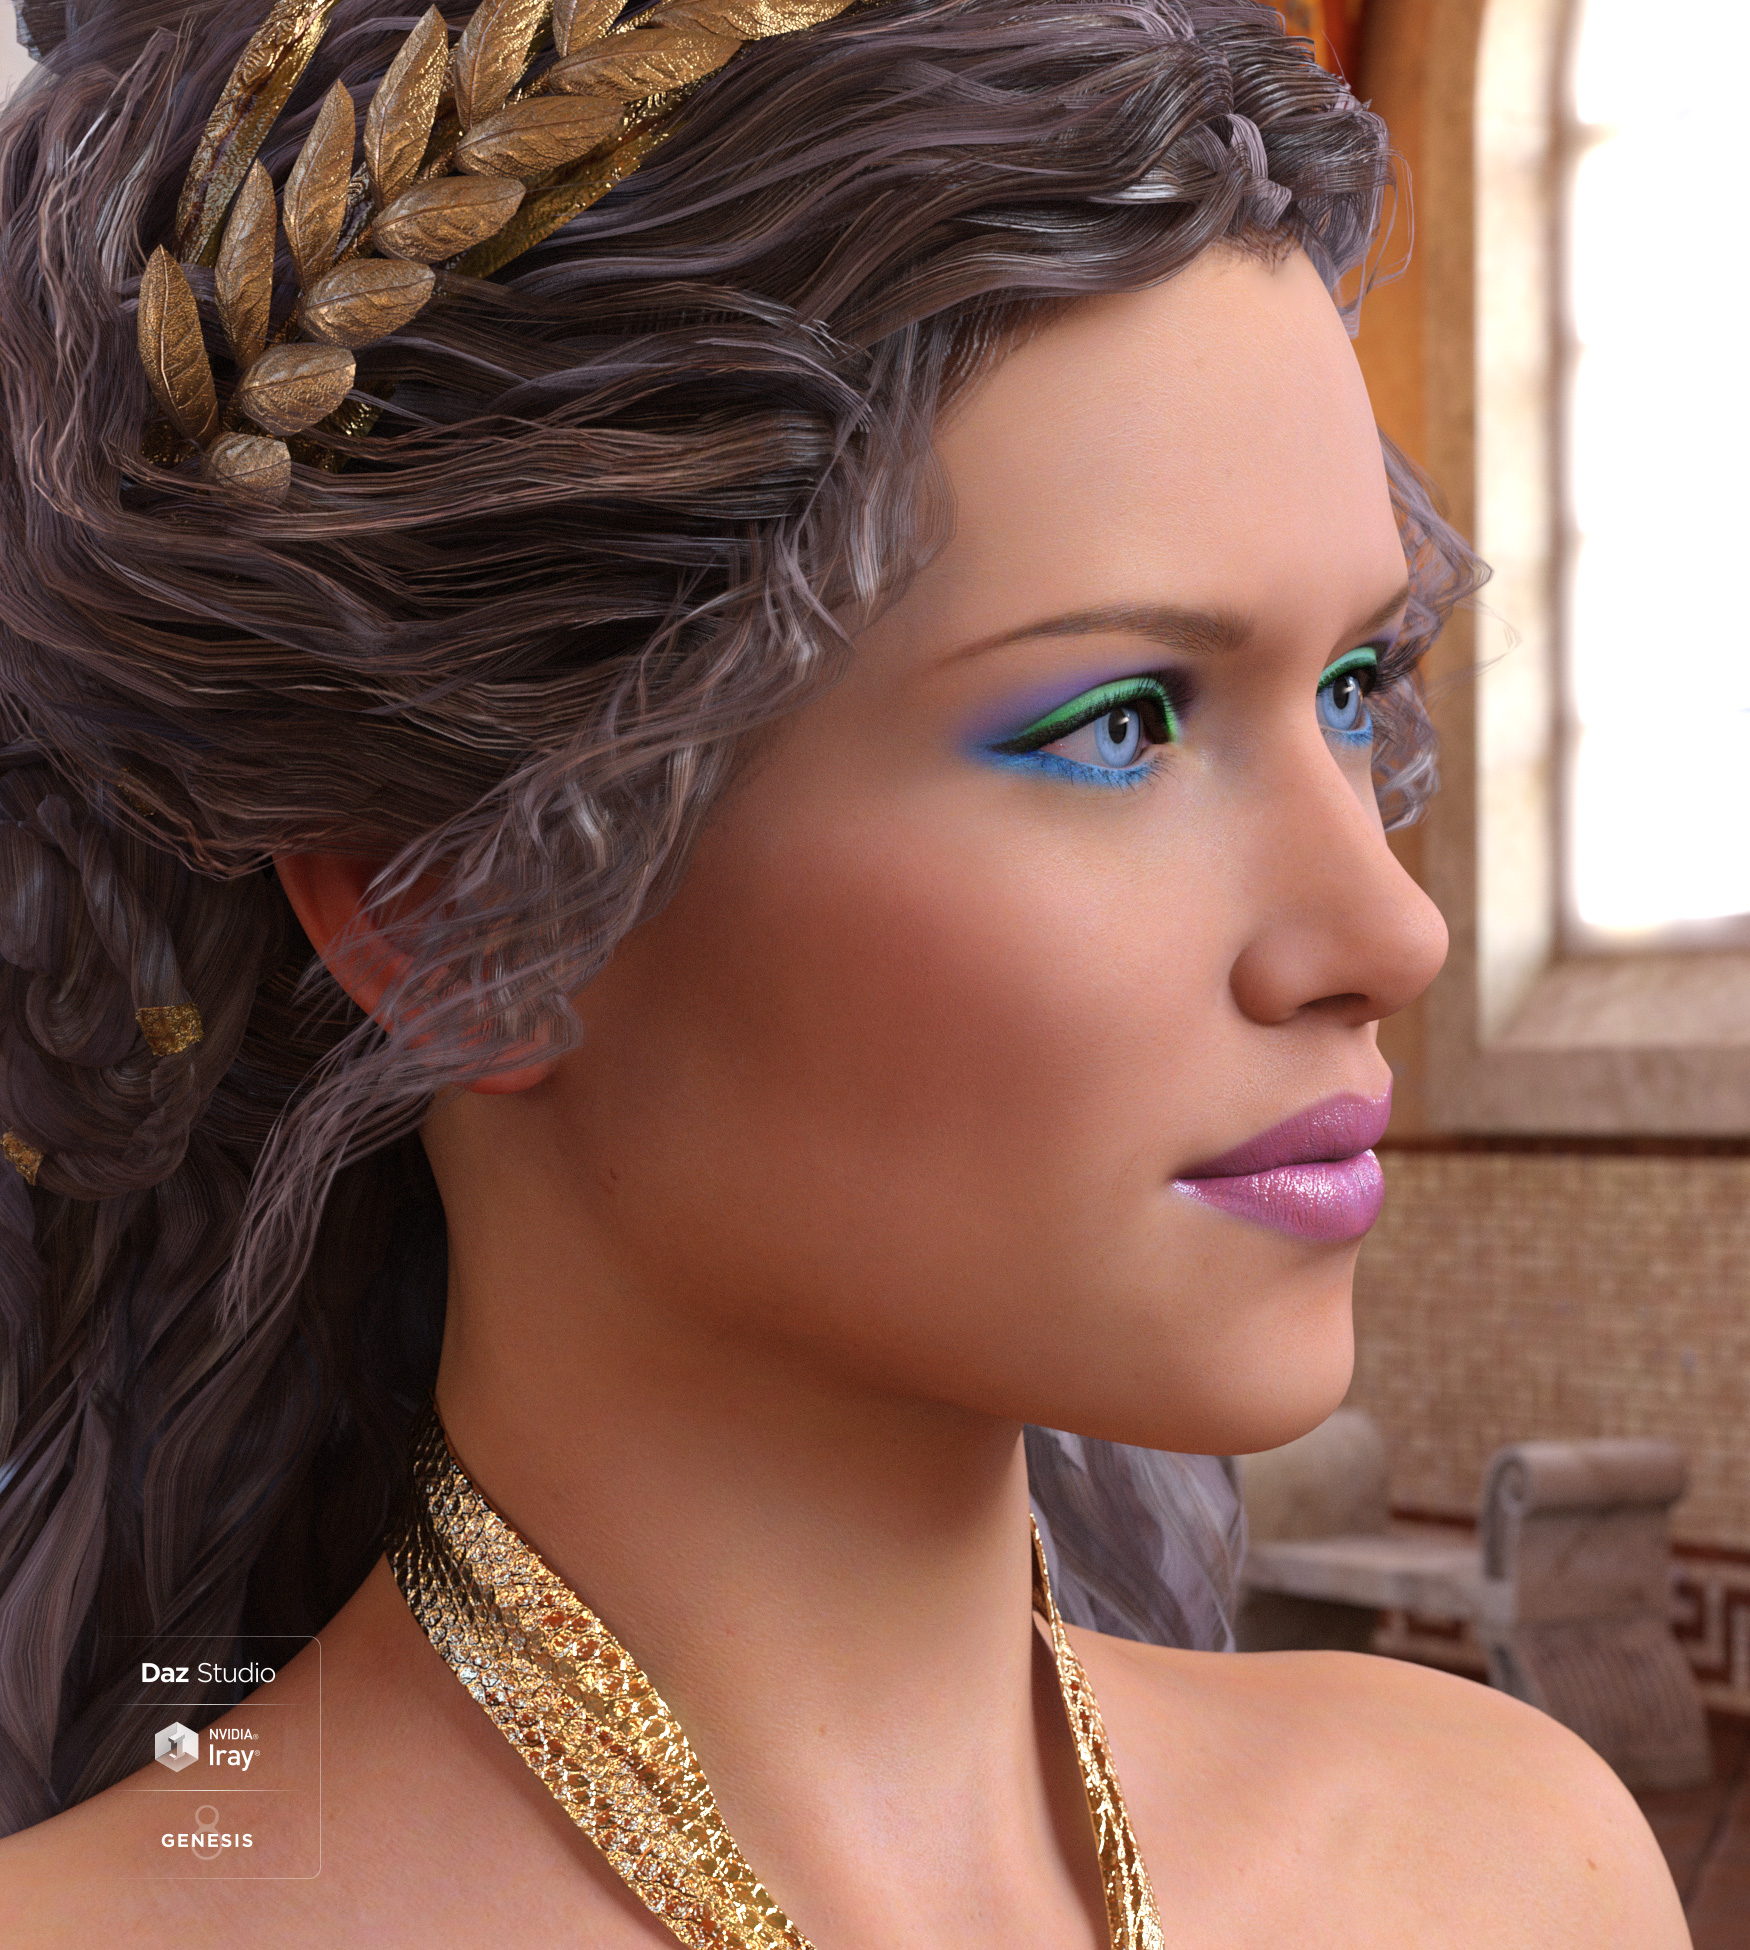 Olympia 7 for Olympia 8 by: Gravity Studios, 3D Models by Daz 3D